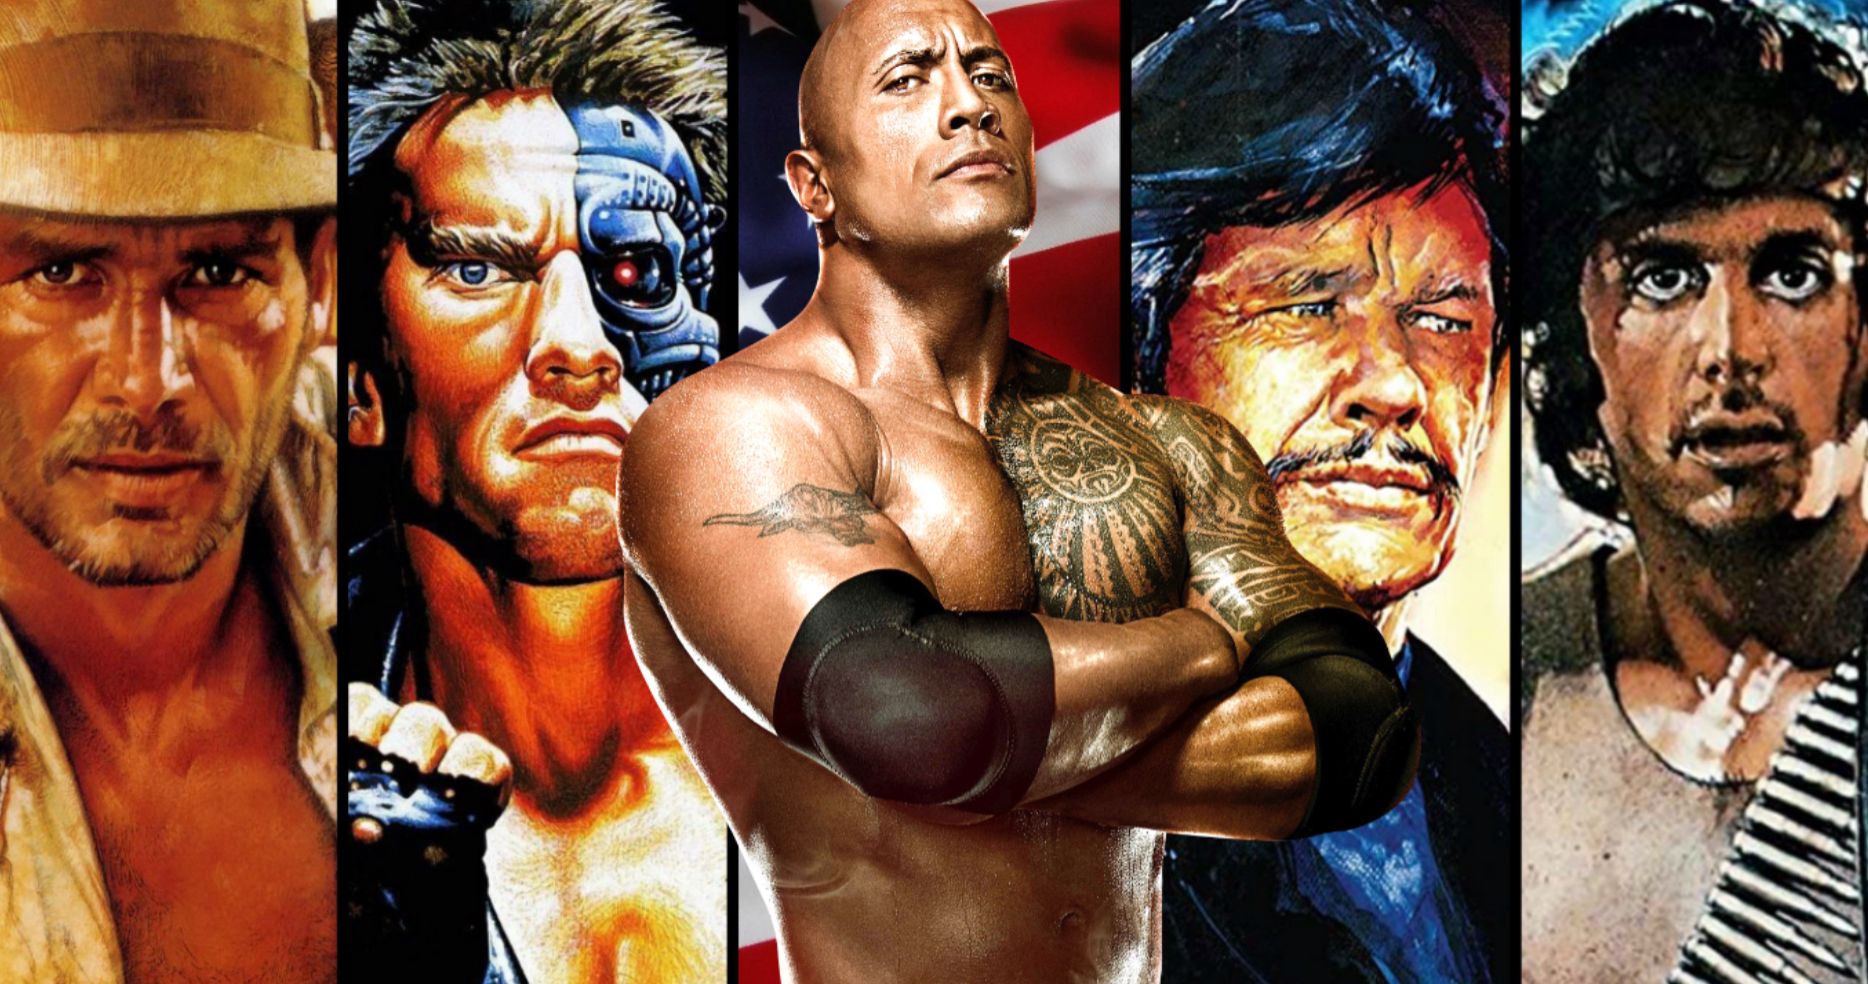 Who Are The Rock's Favorite Action Movie Heroes?